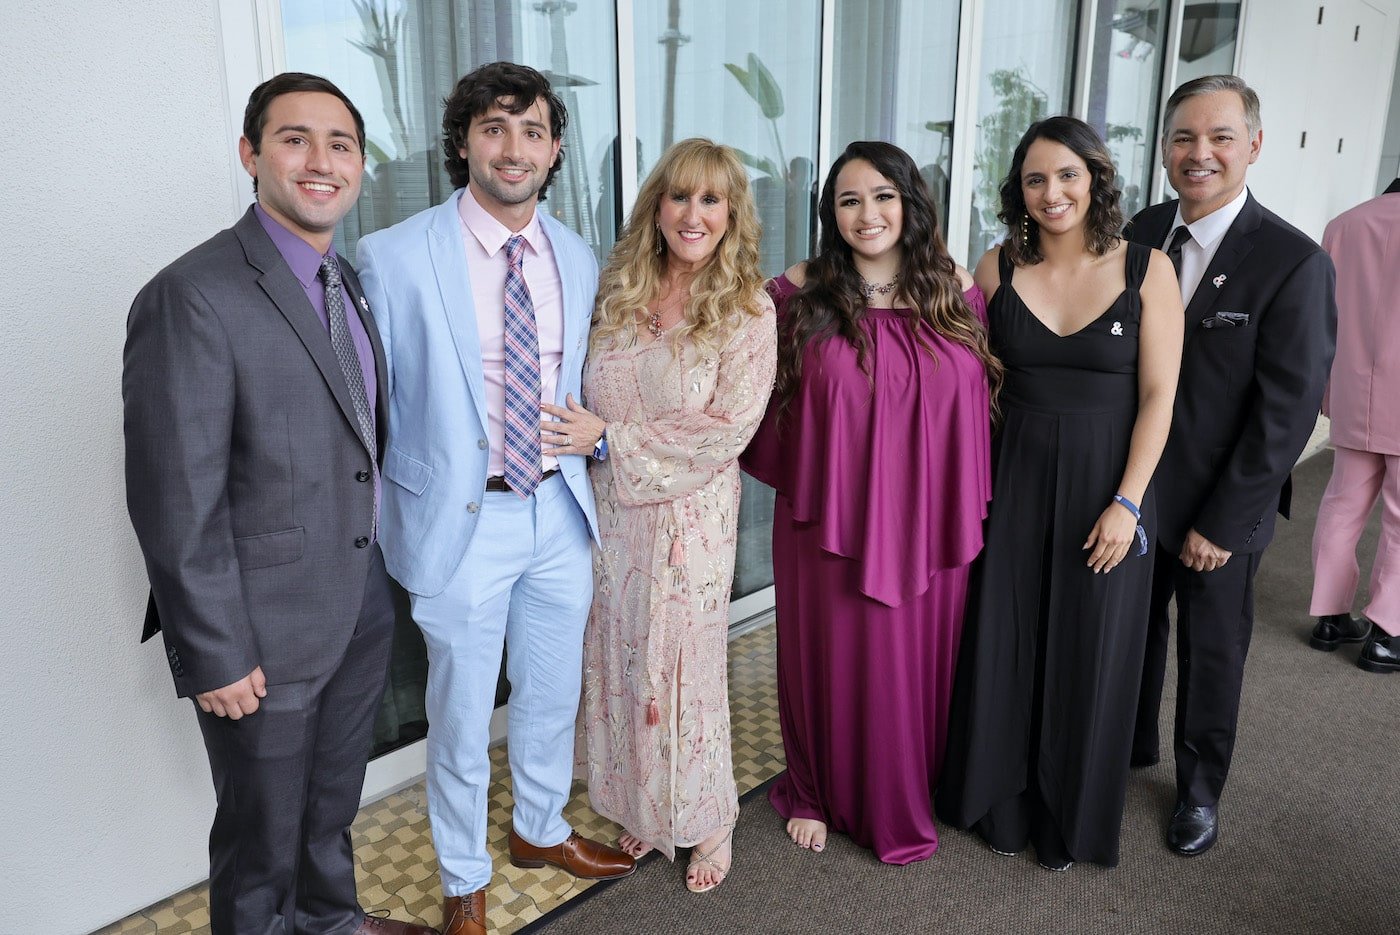 Jazz Jennings and family attended an event